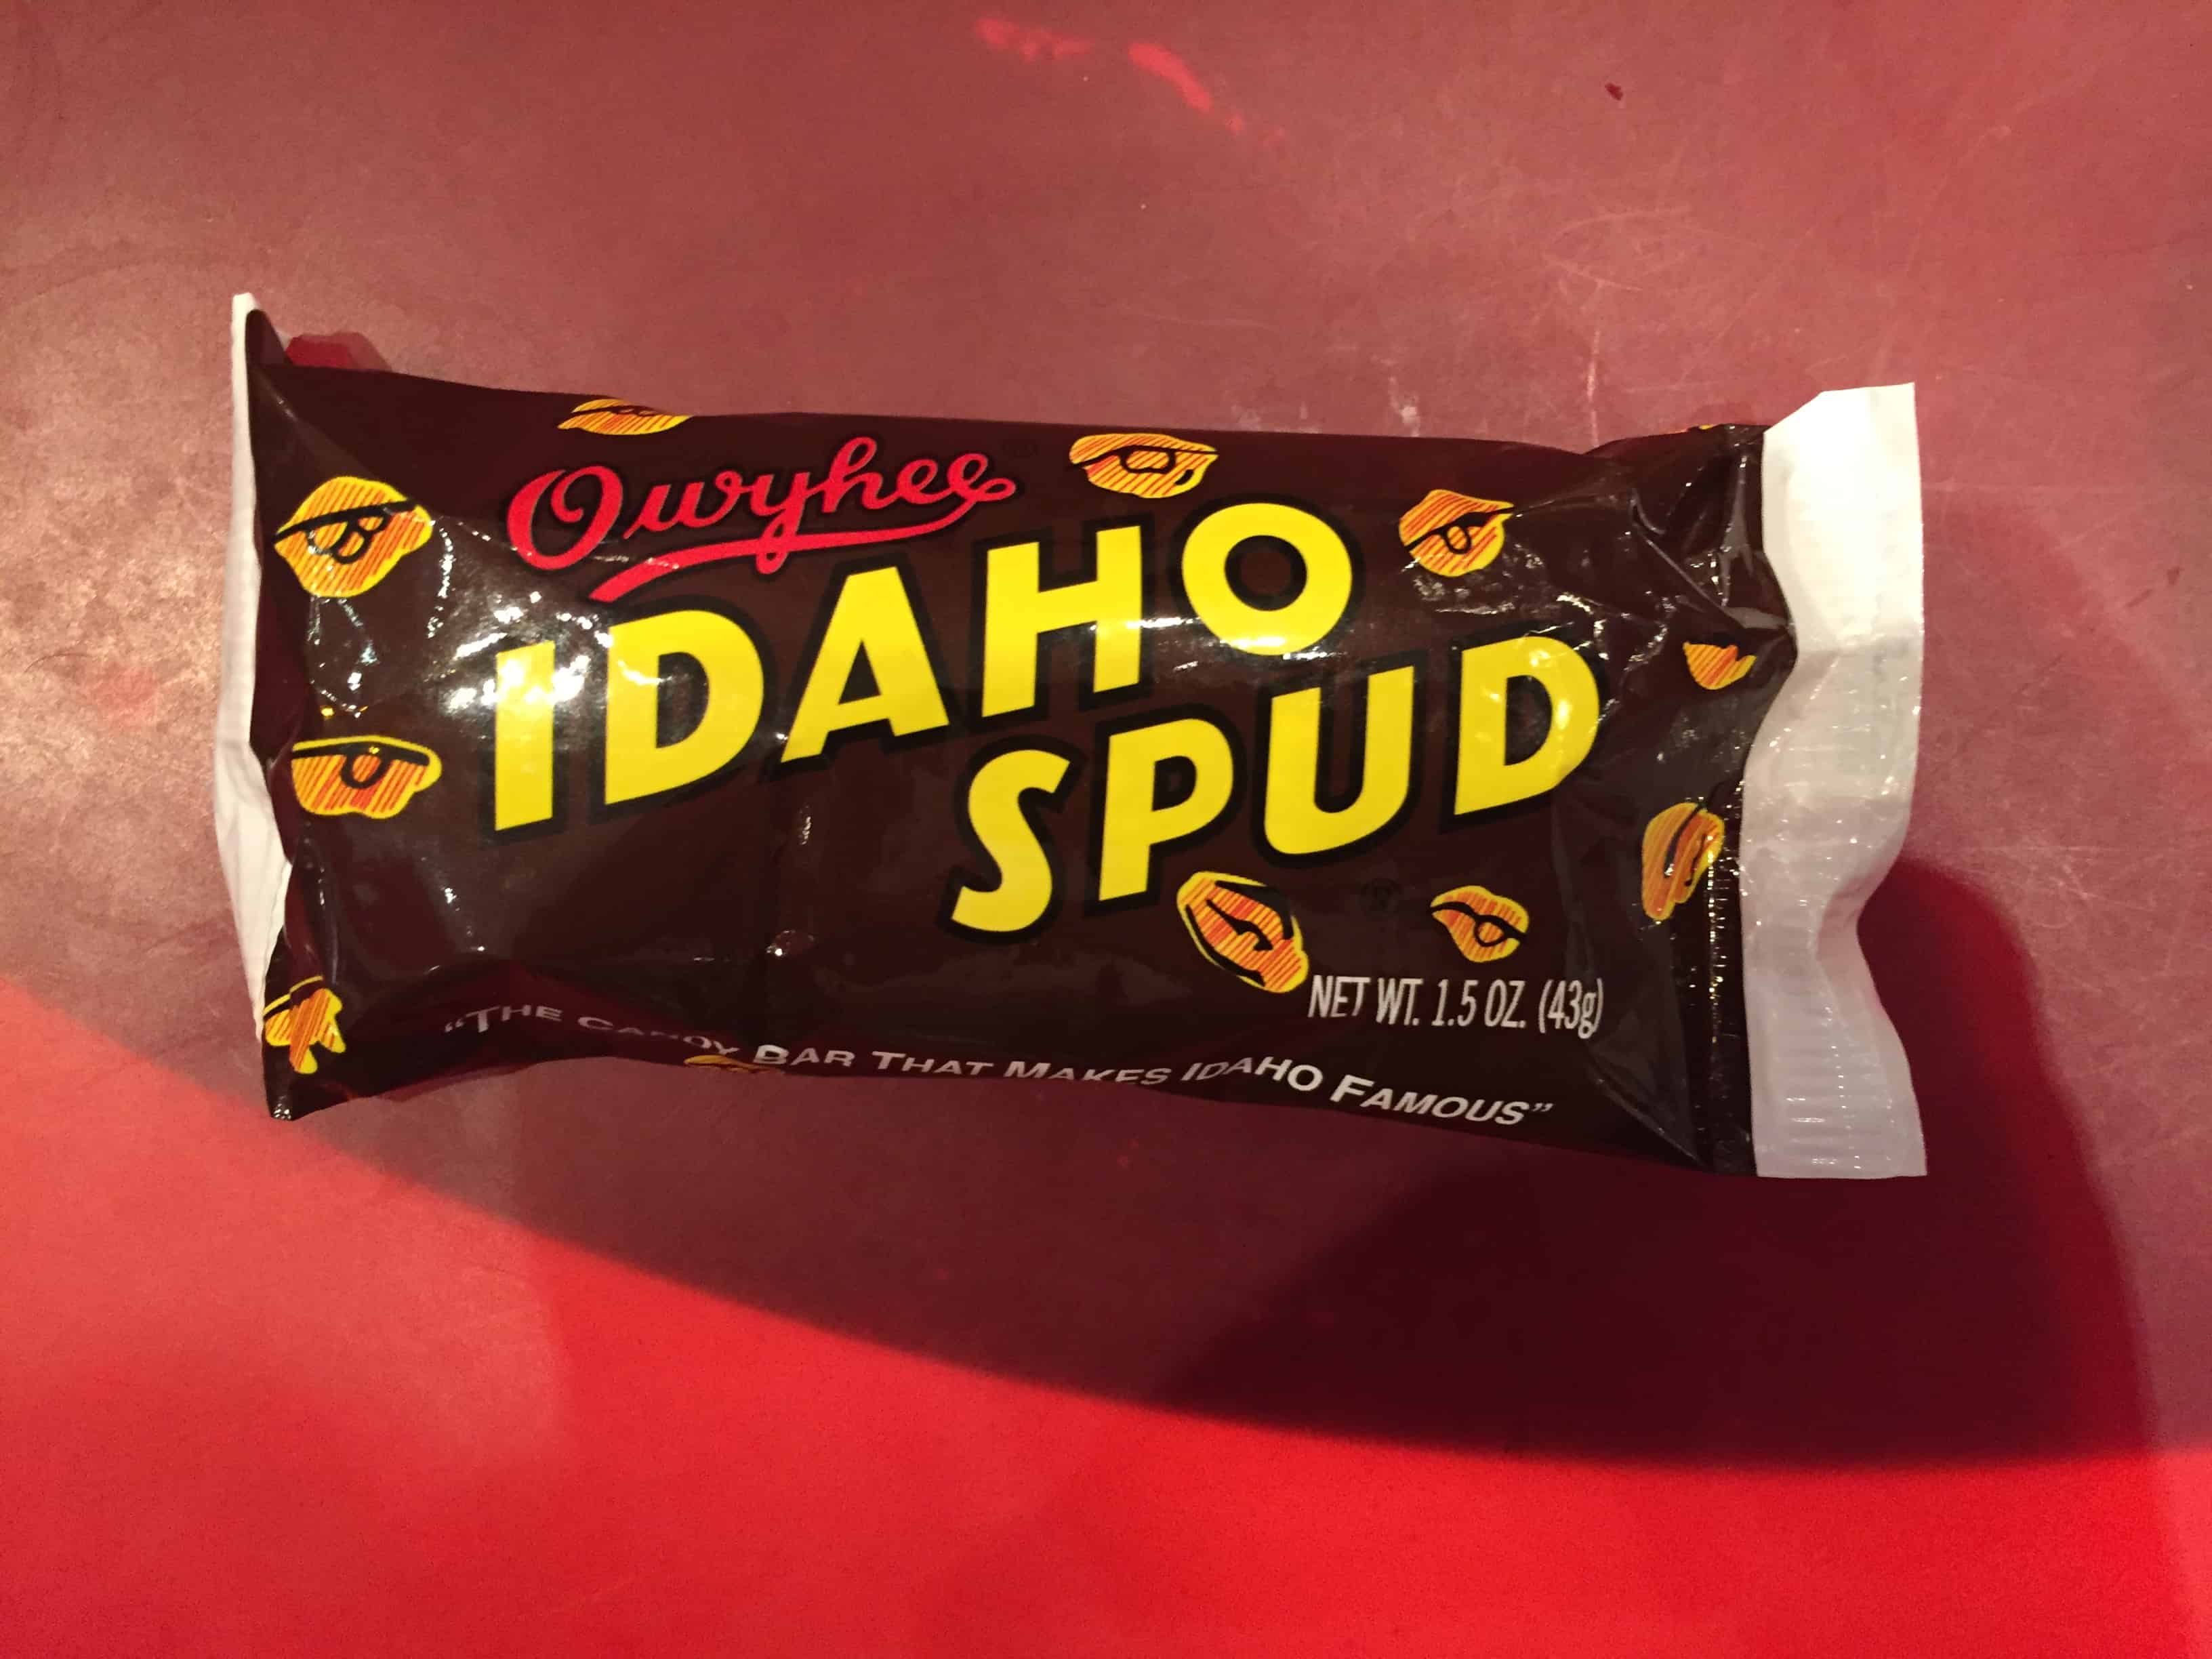 The candy that made Idaho famous!